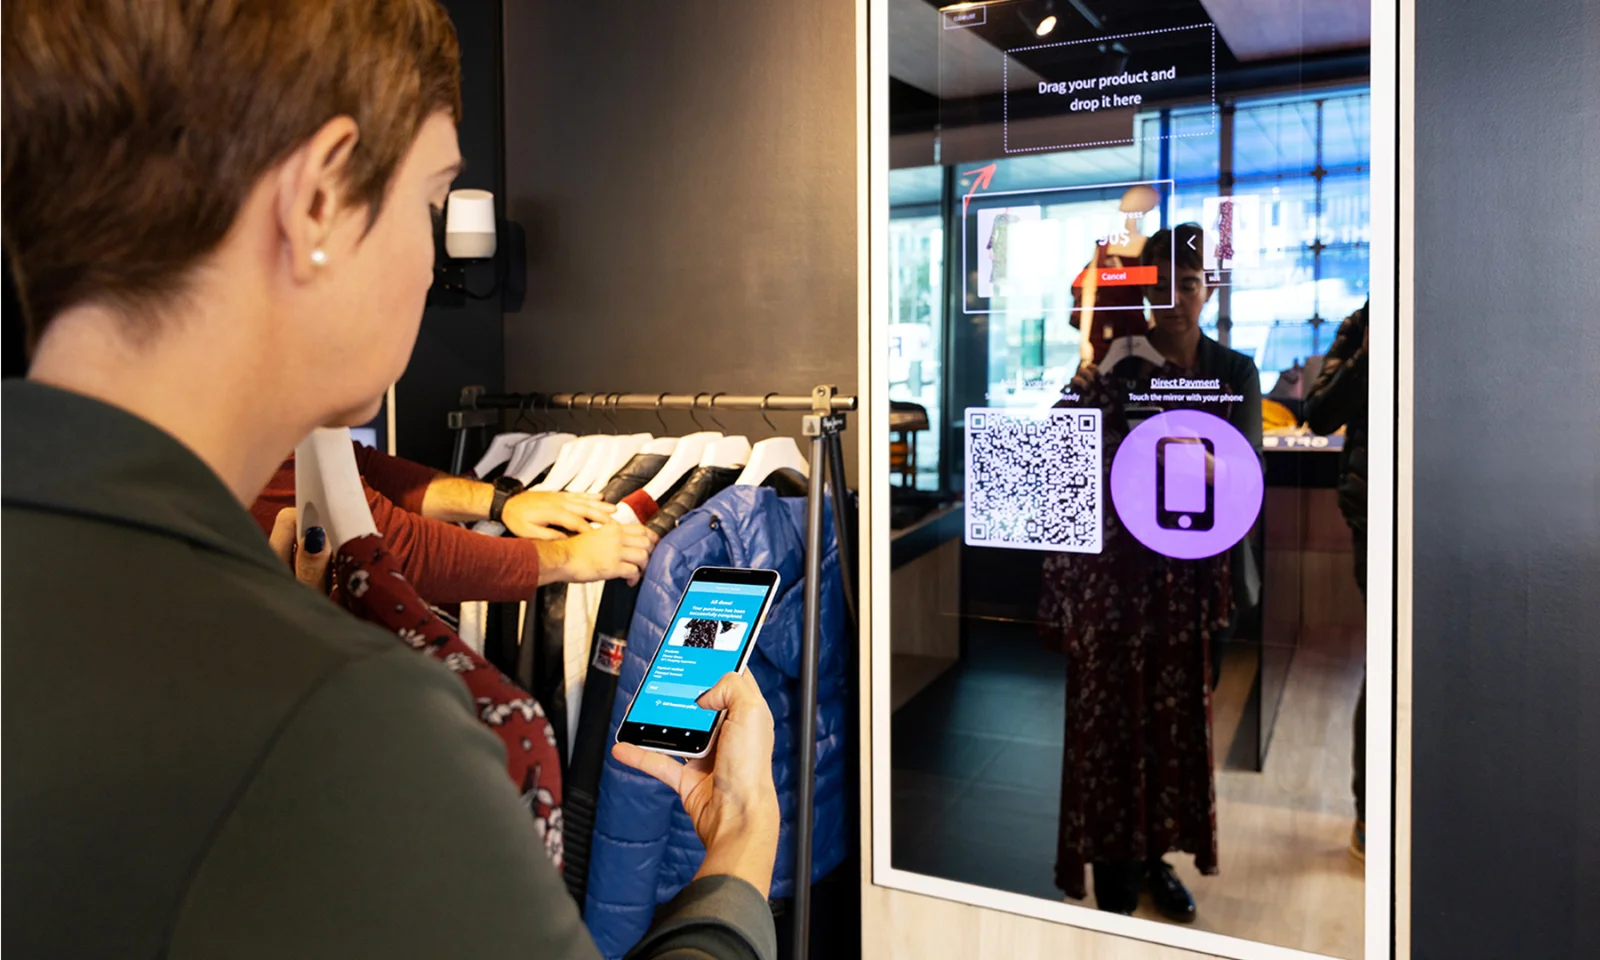 Discover the future of retail with our Design Product Innovation Workshop, featuring an interactive shopping experience. This image showcases a participant using a smartphone to interact with a smart mirror display, which provides product details, QR codes, and seamless payment options. Enhance customer engagement and streamline the shopping process with innovative retail solutions designed in our expert-led workshops. Transform your retail strategy with cutting-edge technology and interactive experiences.